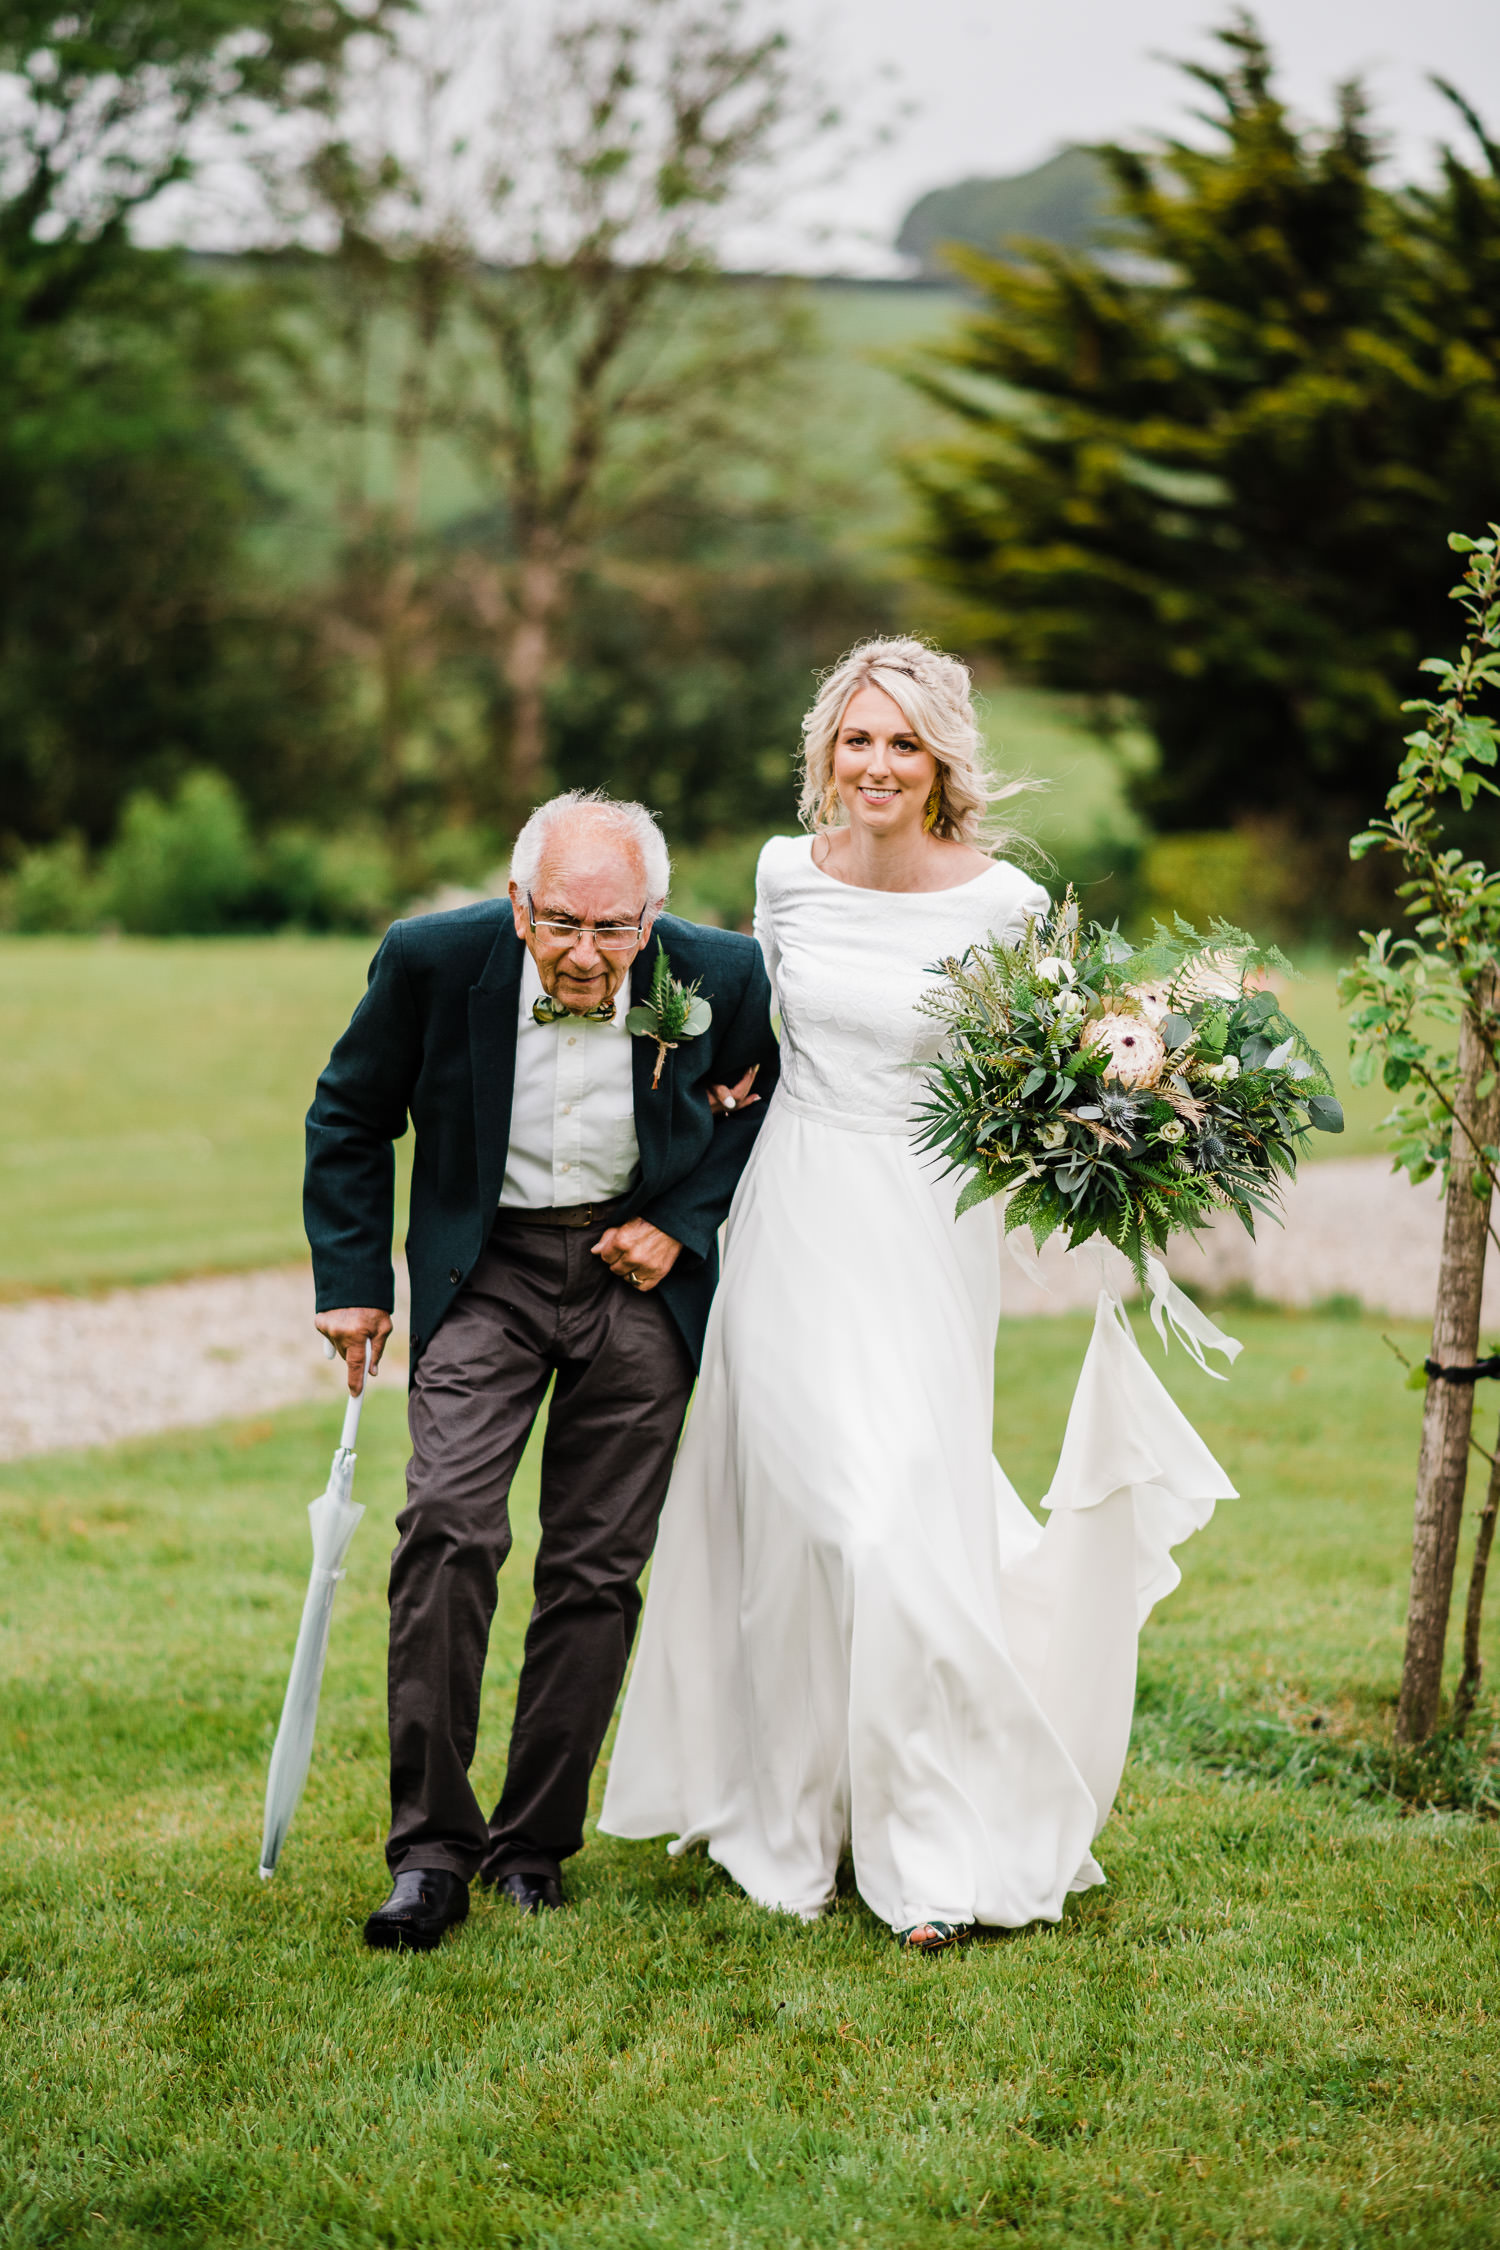 Bride's grandfather walks her down the aisle.